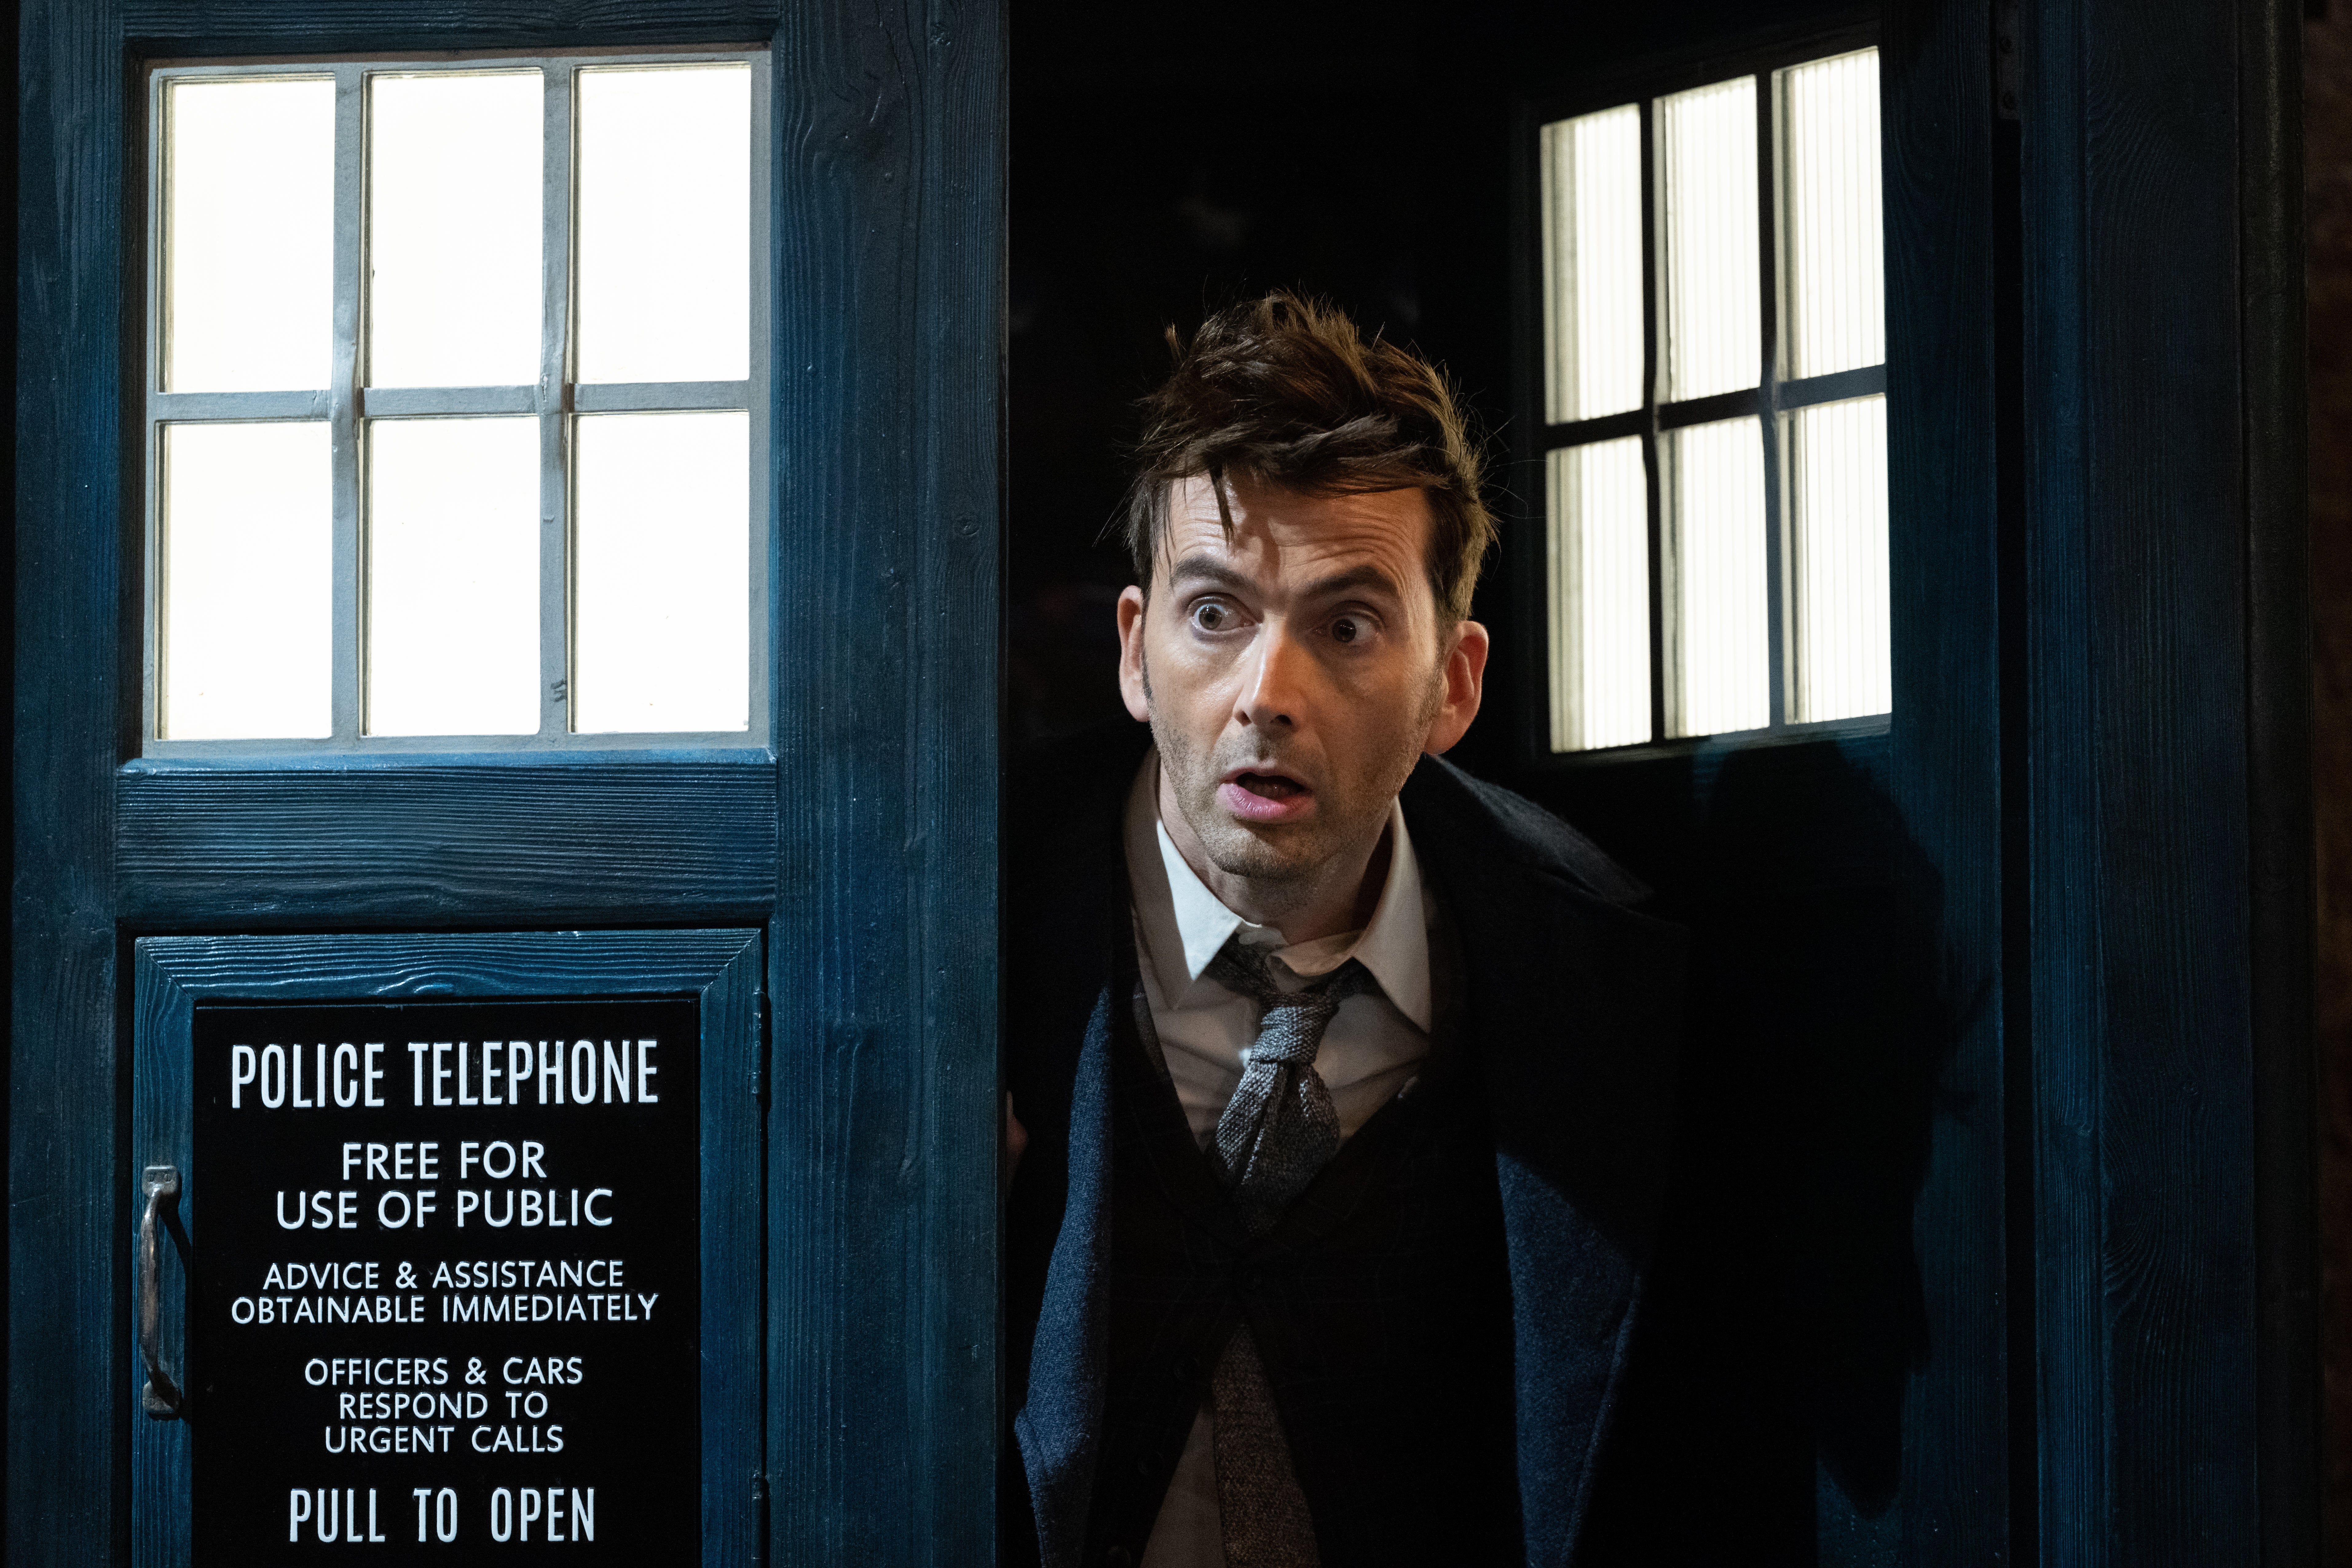 doctor who, david tennant, russell t davies, catherine tate, yasmin finney, miriam margolyes, doctor who: the star beast review – david tennant is back and gloriously eccentric